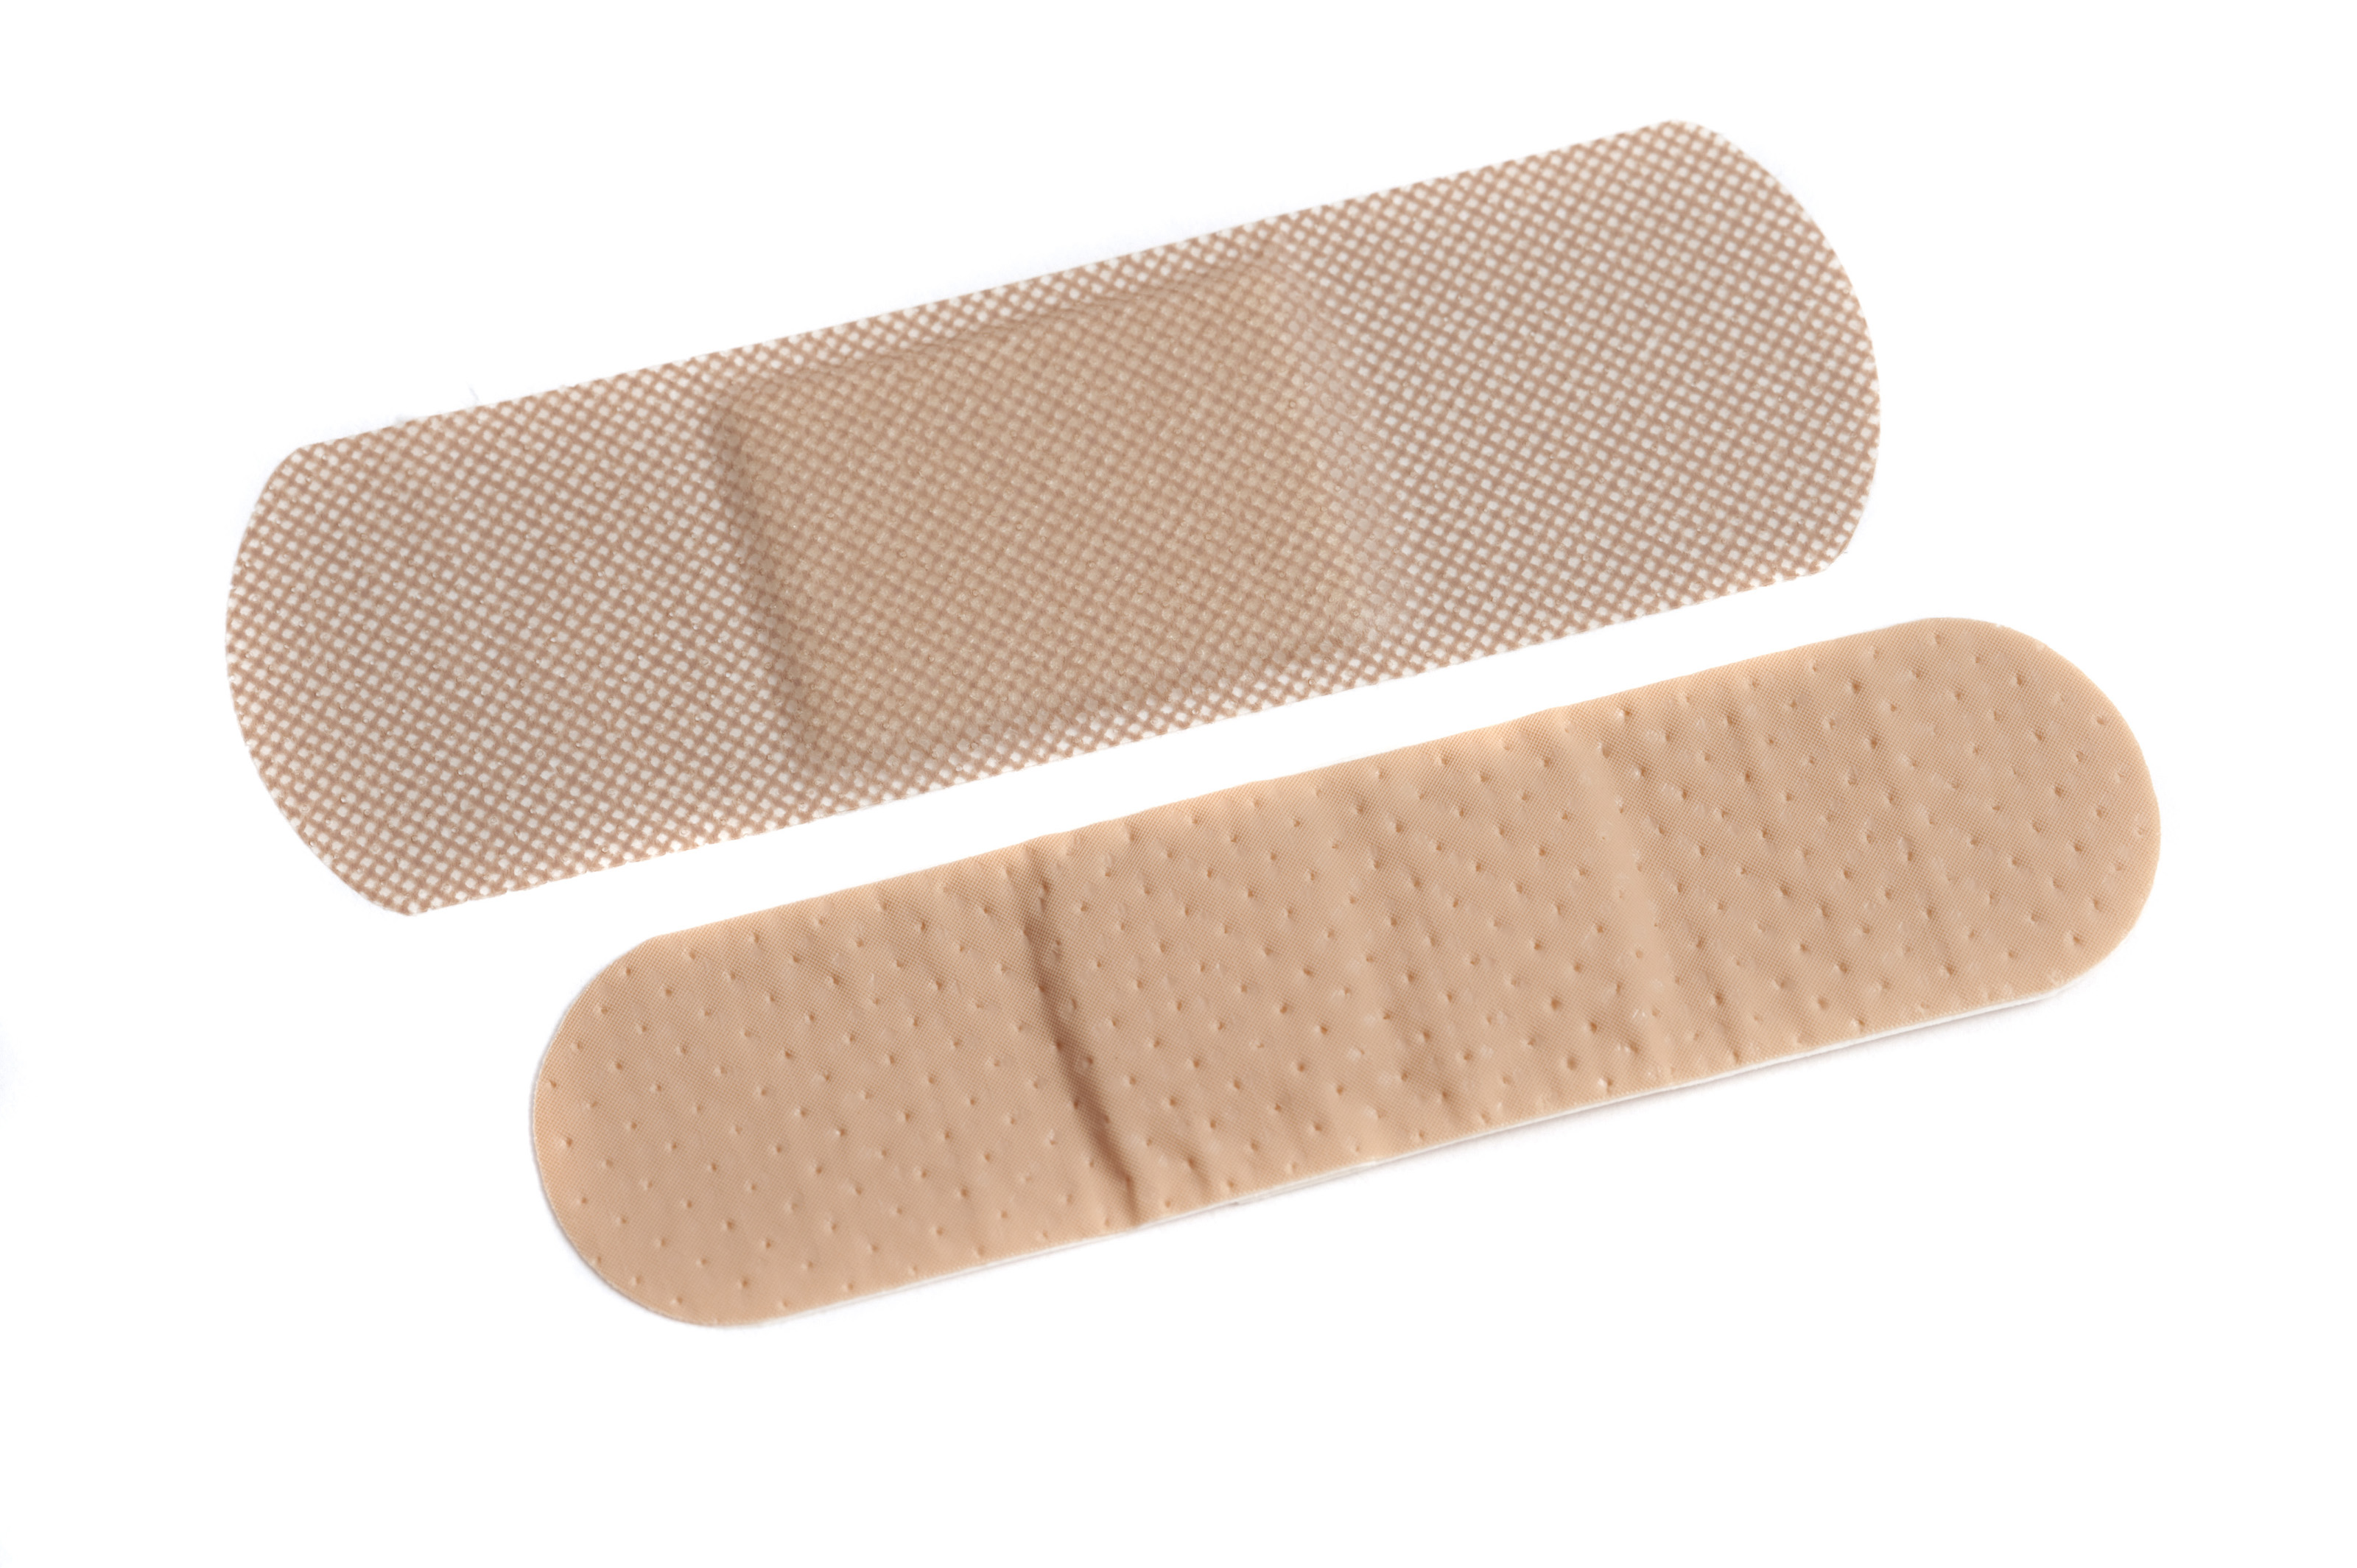 Two different bandaids-6751 | Stockarch Free Stock Photo Archive